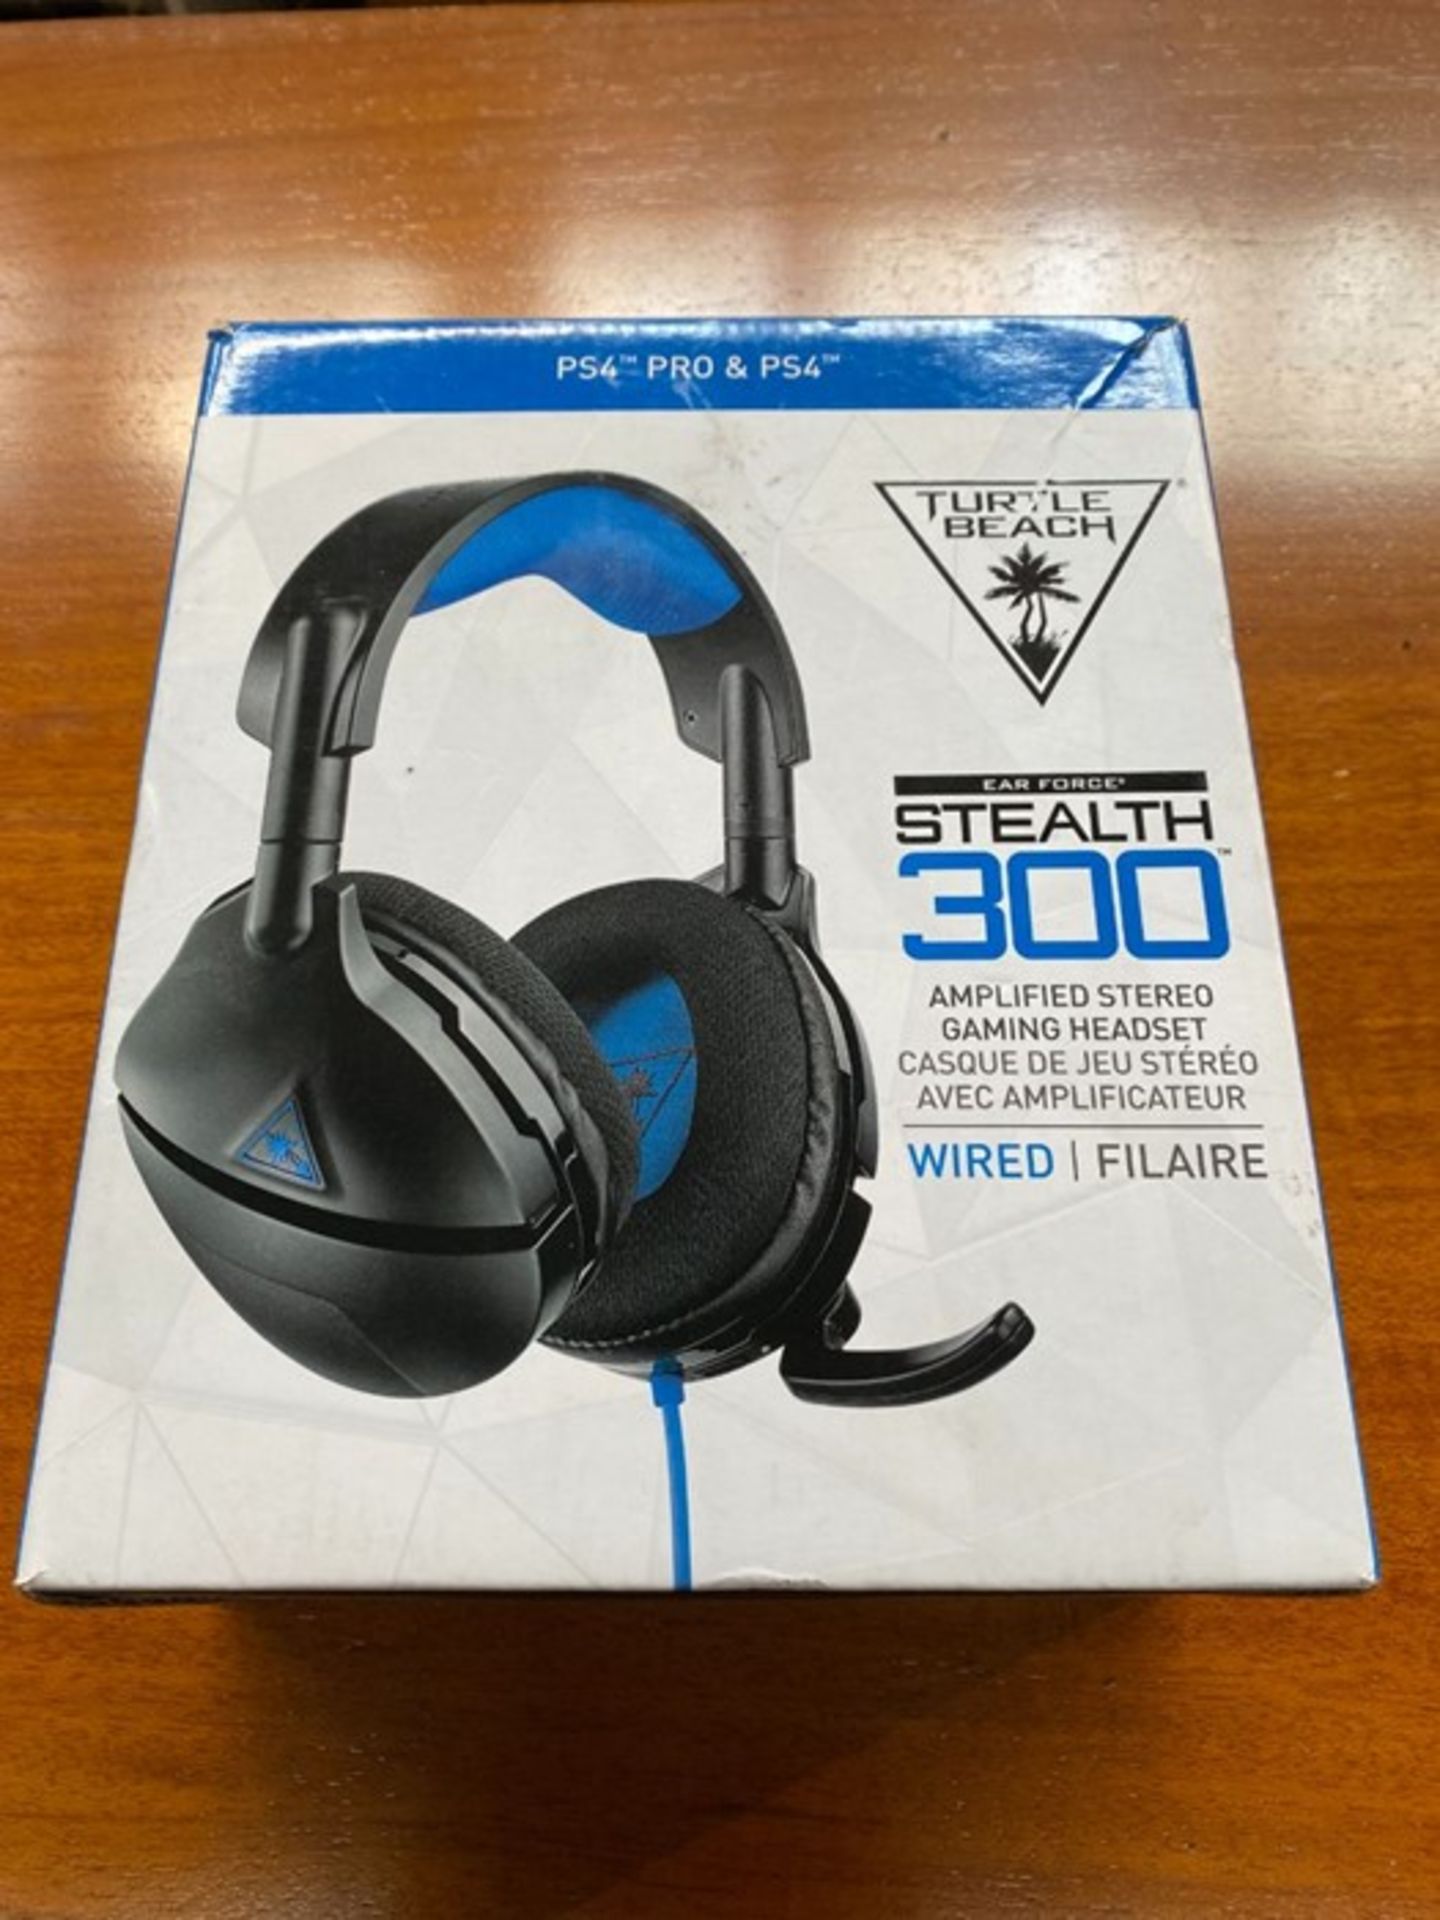 ONE LOT TO CONTAIN ONE BOXED PLAYSTATION TURTLE BEACH STEALTH 300 HEADSET UNTESTED CUSOMER RETURNS